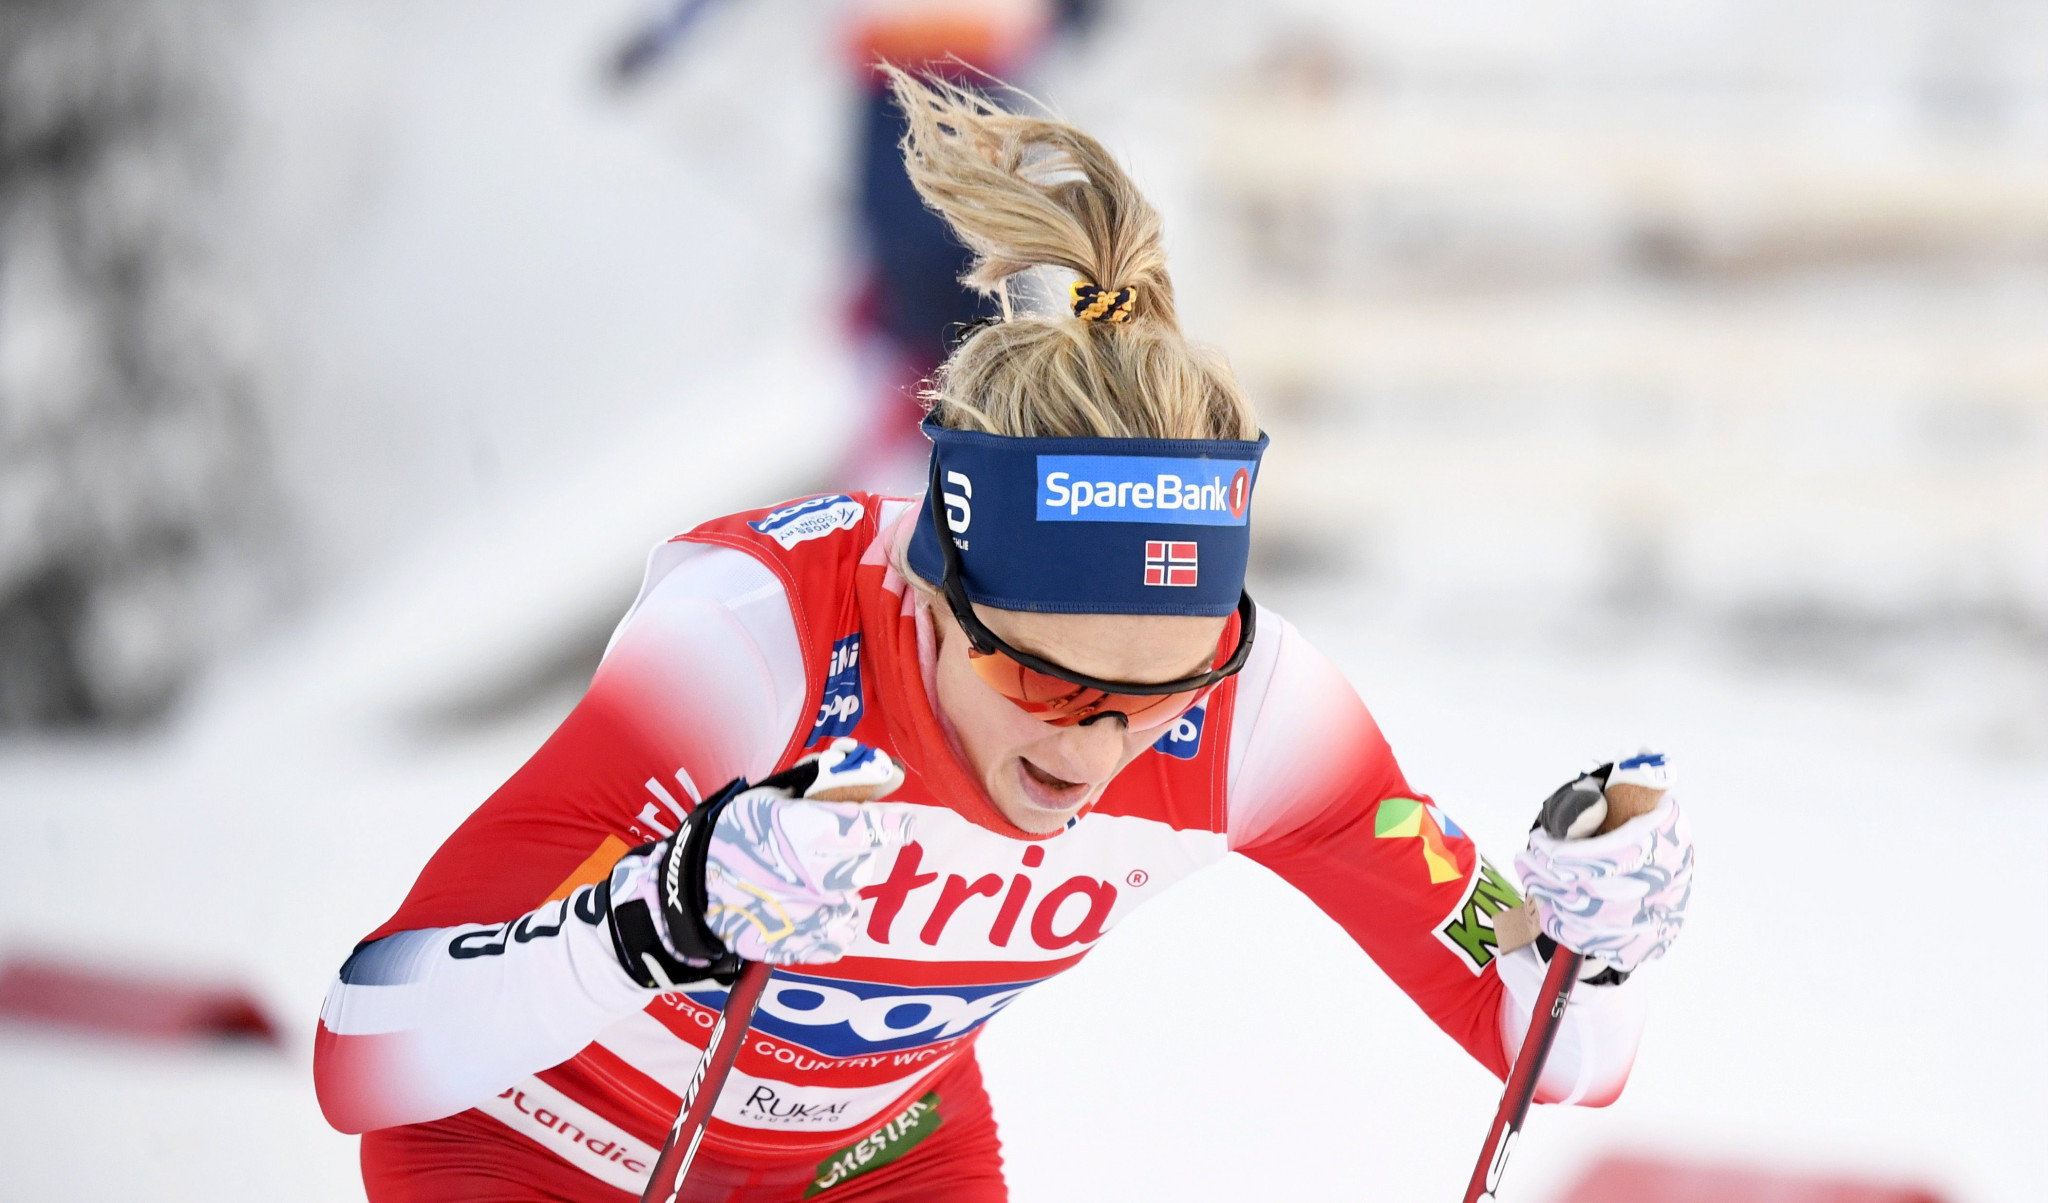 Therese Johaug was victorious in the women's 10km race ©Getty Images